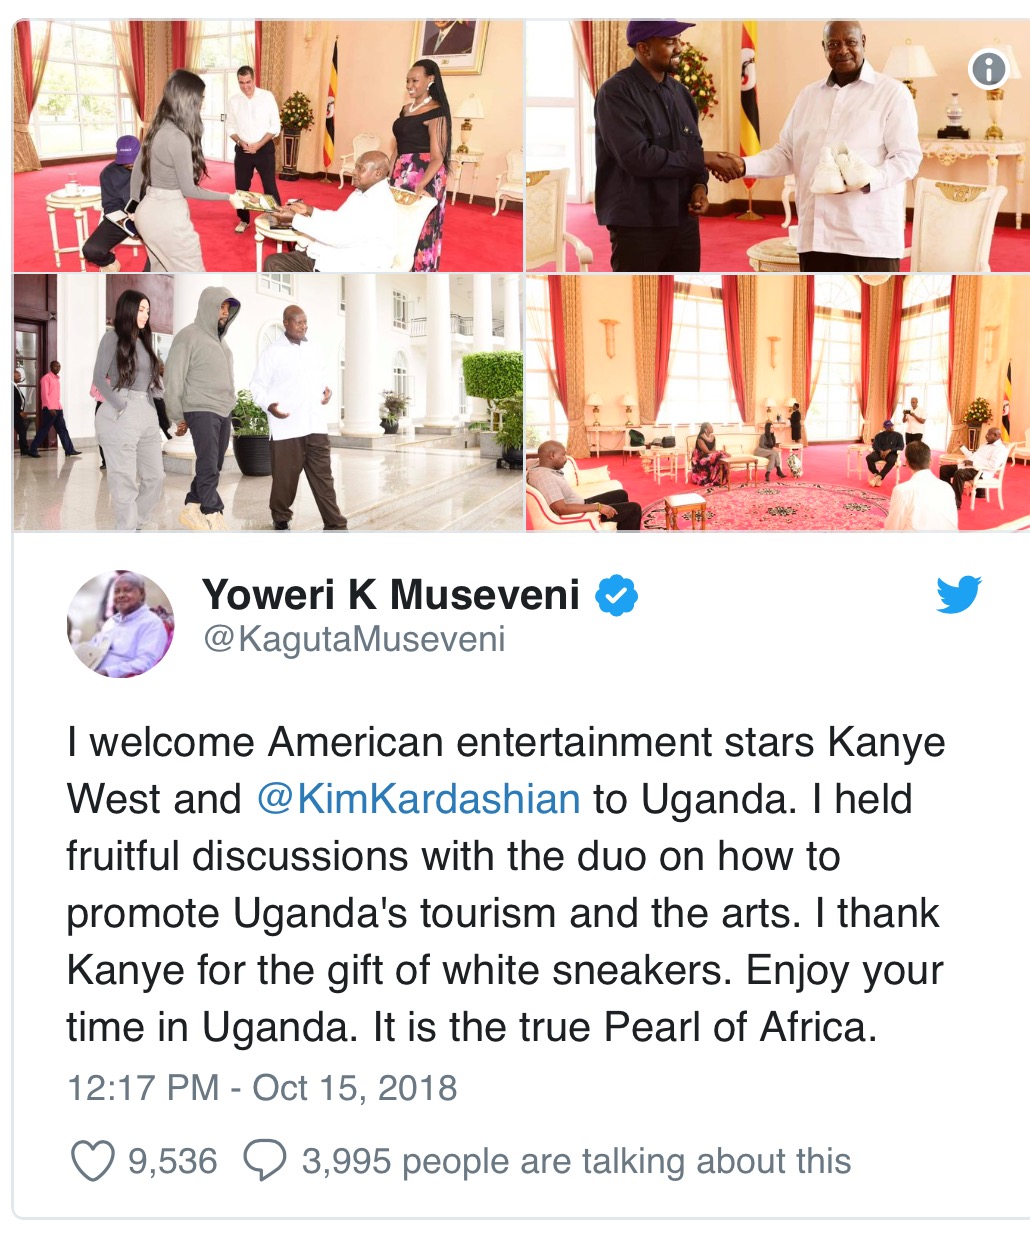 Kanye West and family received in Uganda like Royalty